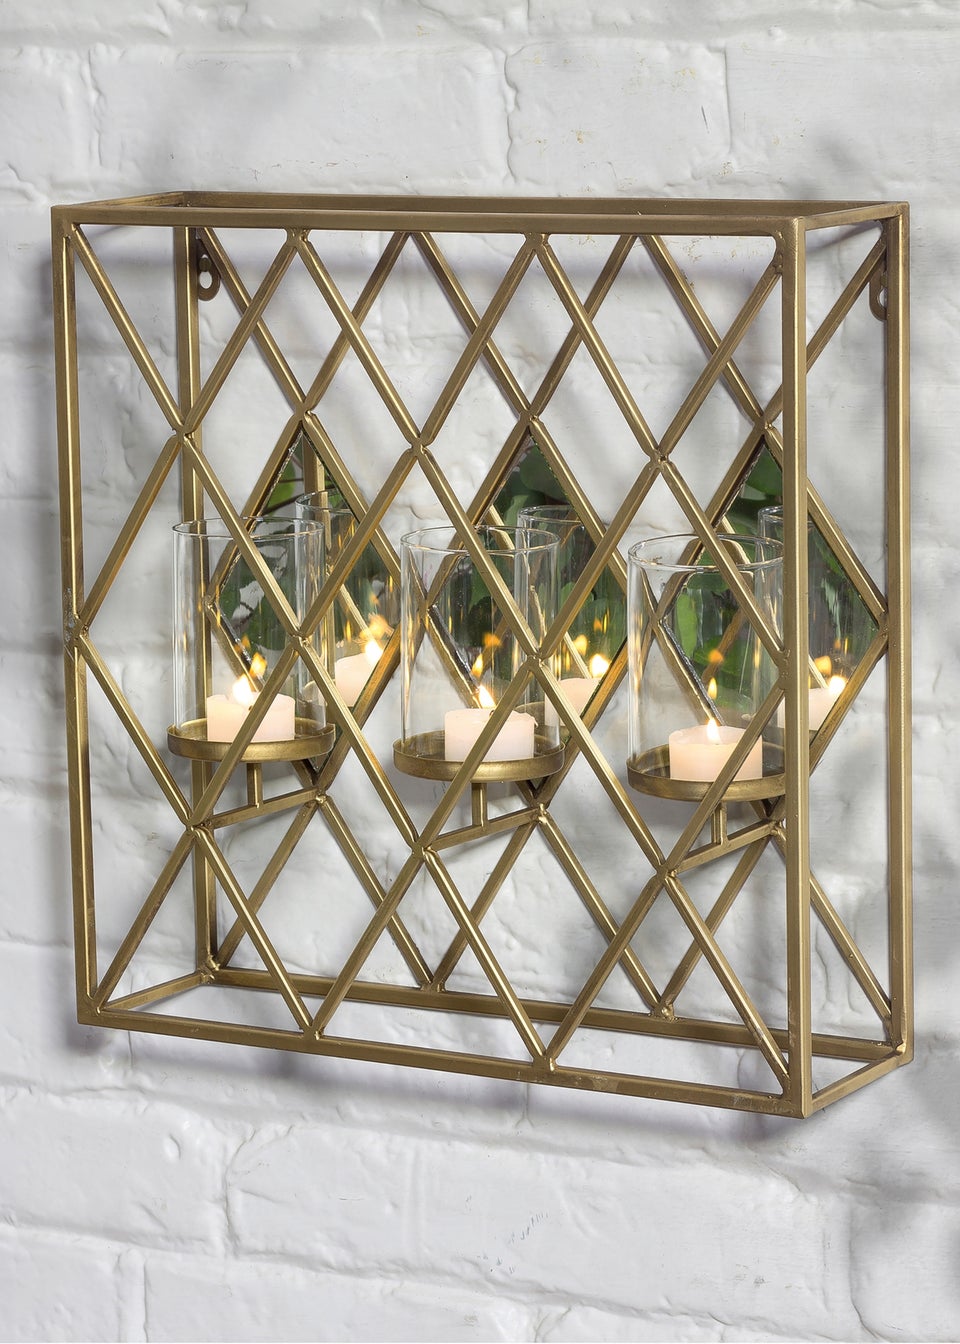 Premier Decorations Gold Square Wall Mounted Mirrored Candle Holder (37cm x 37cm)